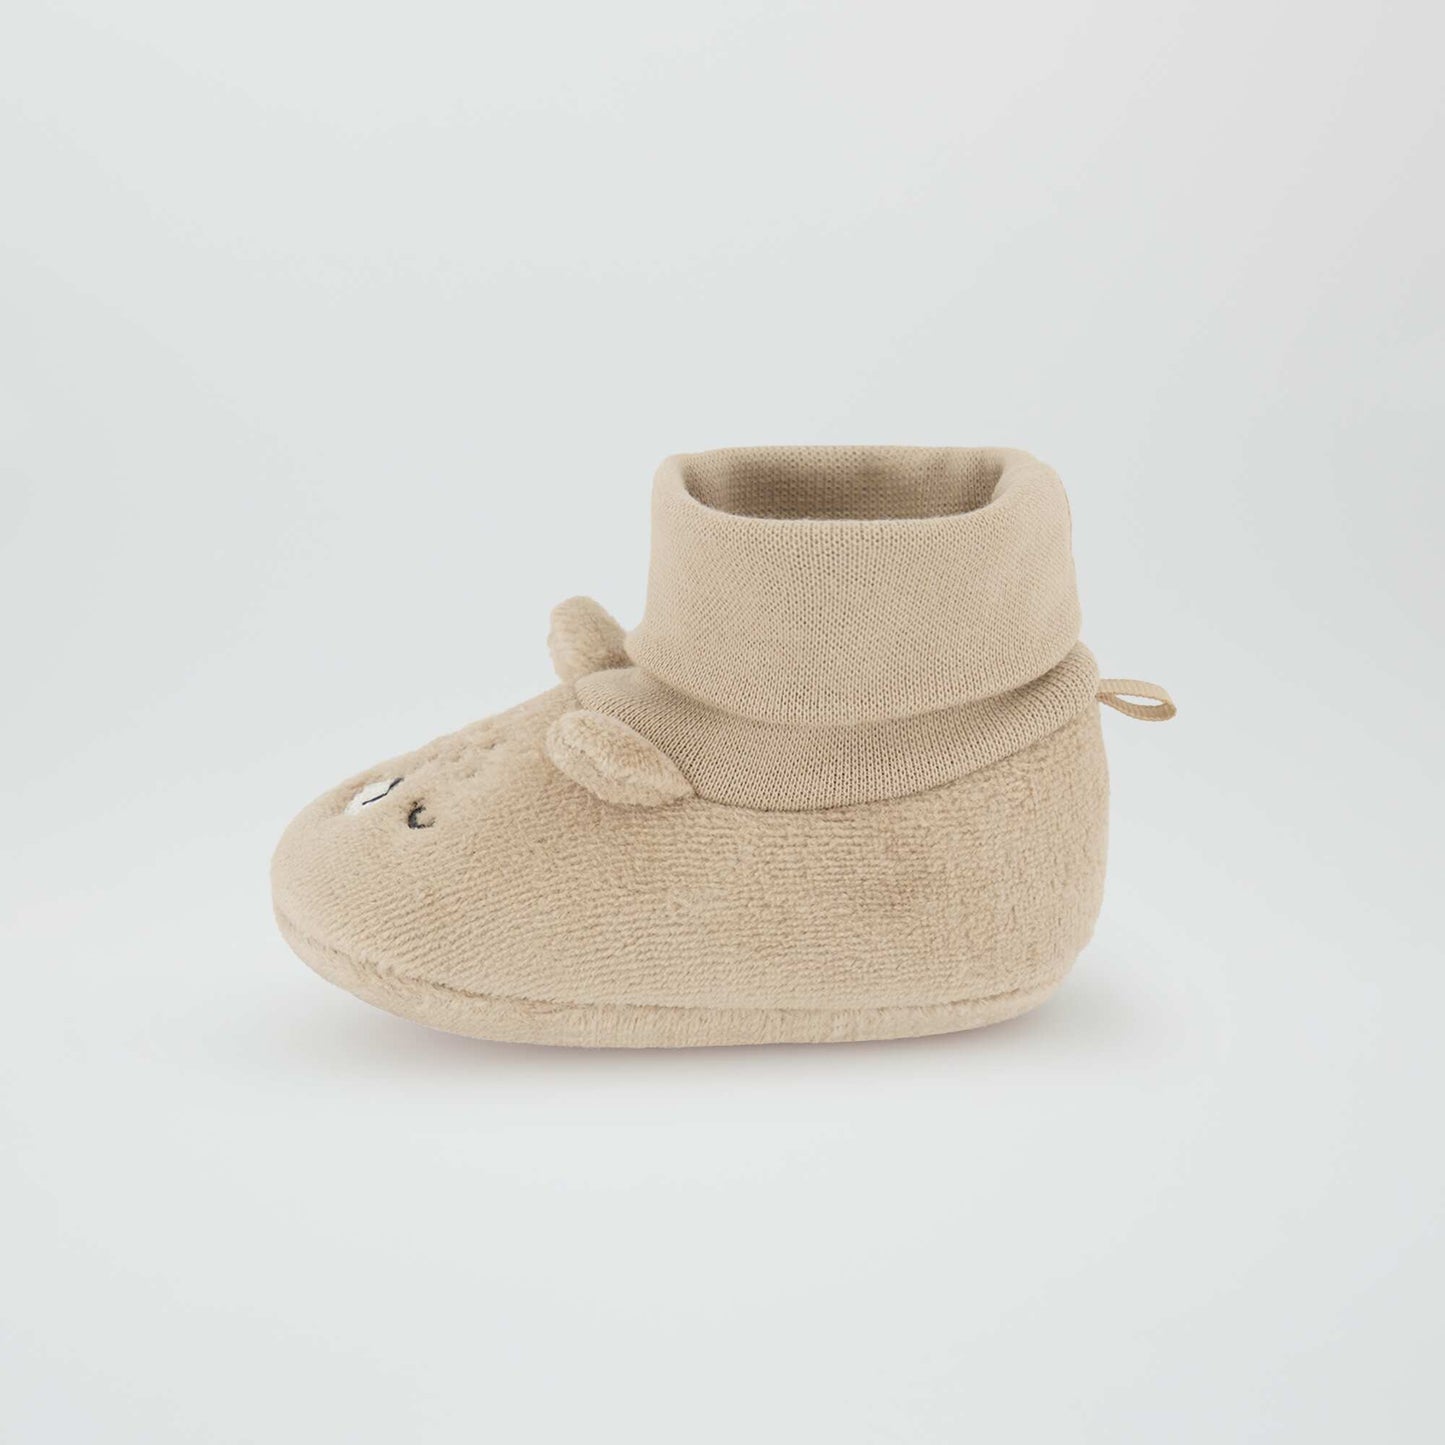 Chaussons Ours Beige